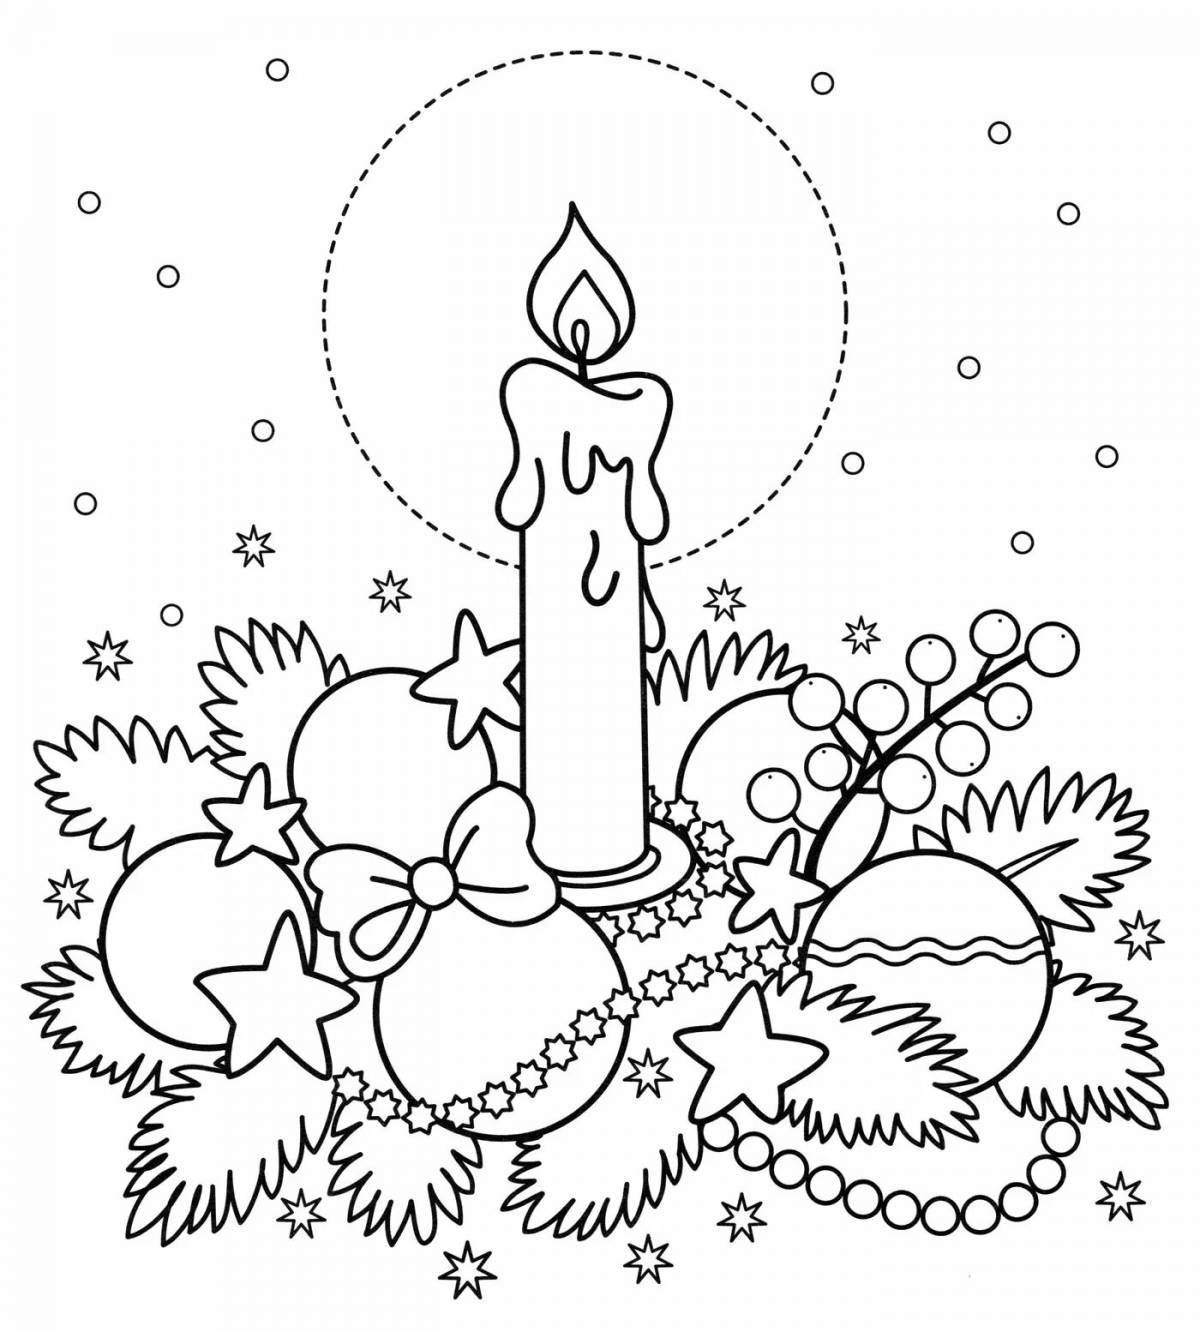 Bright Christmas candles coloring book for kids